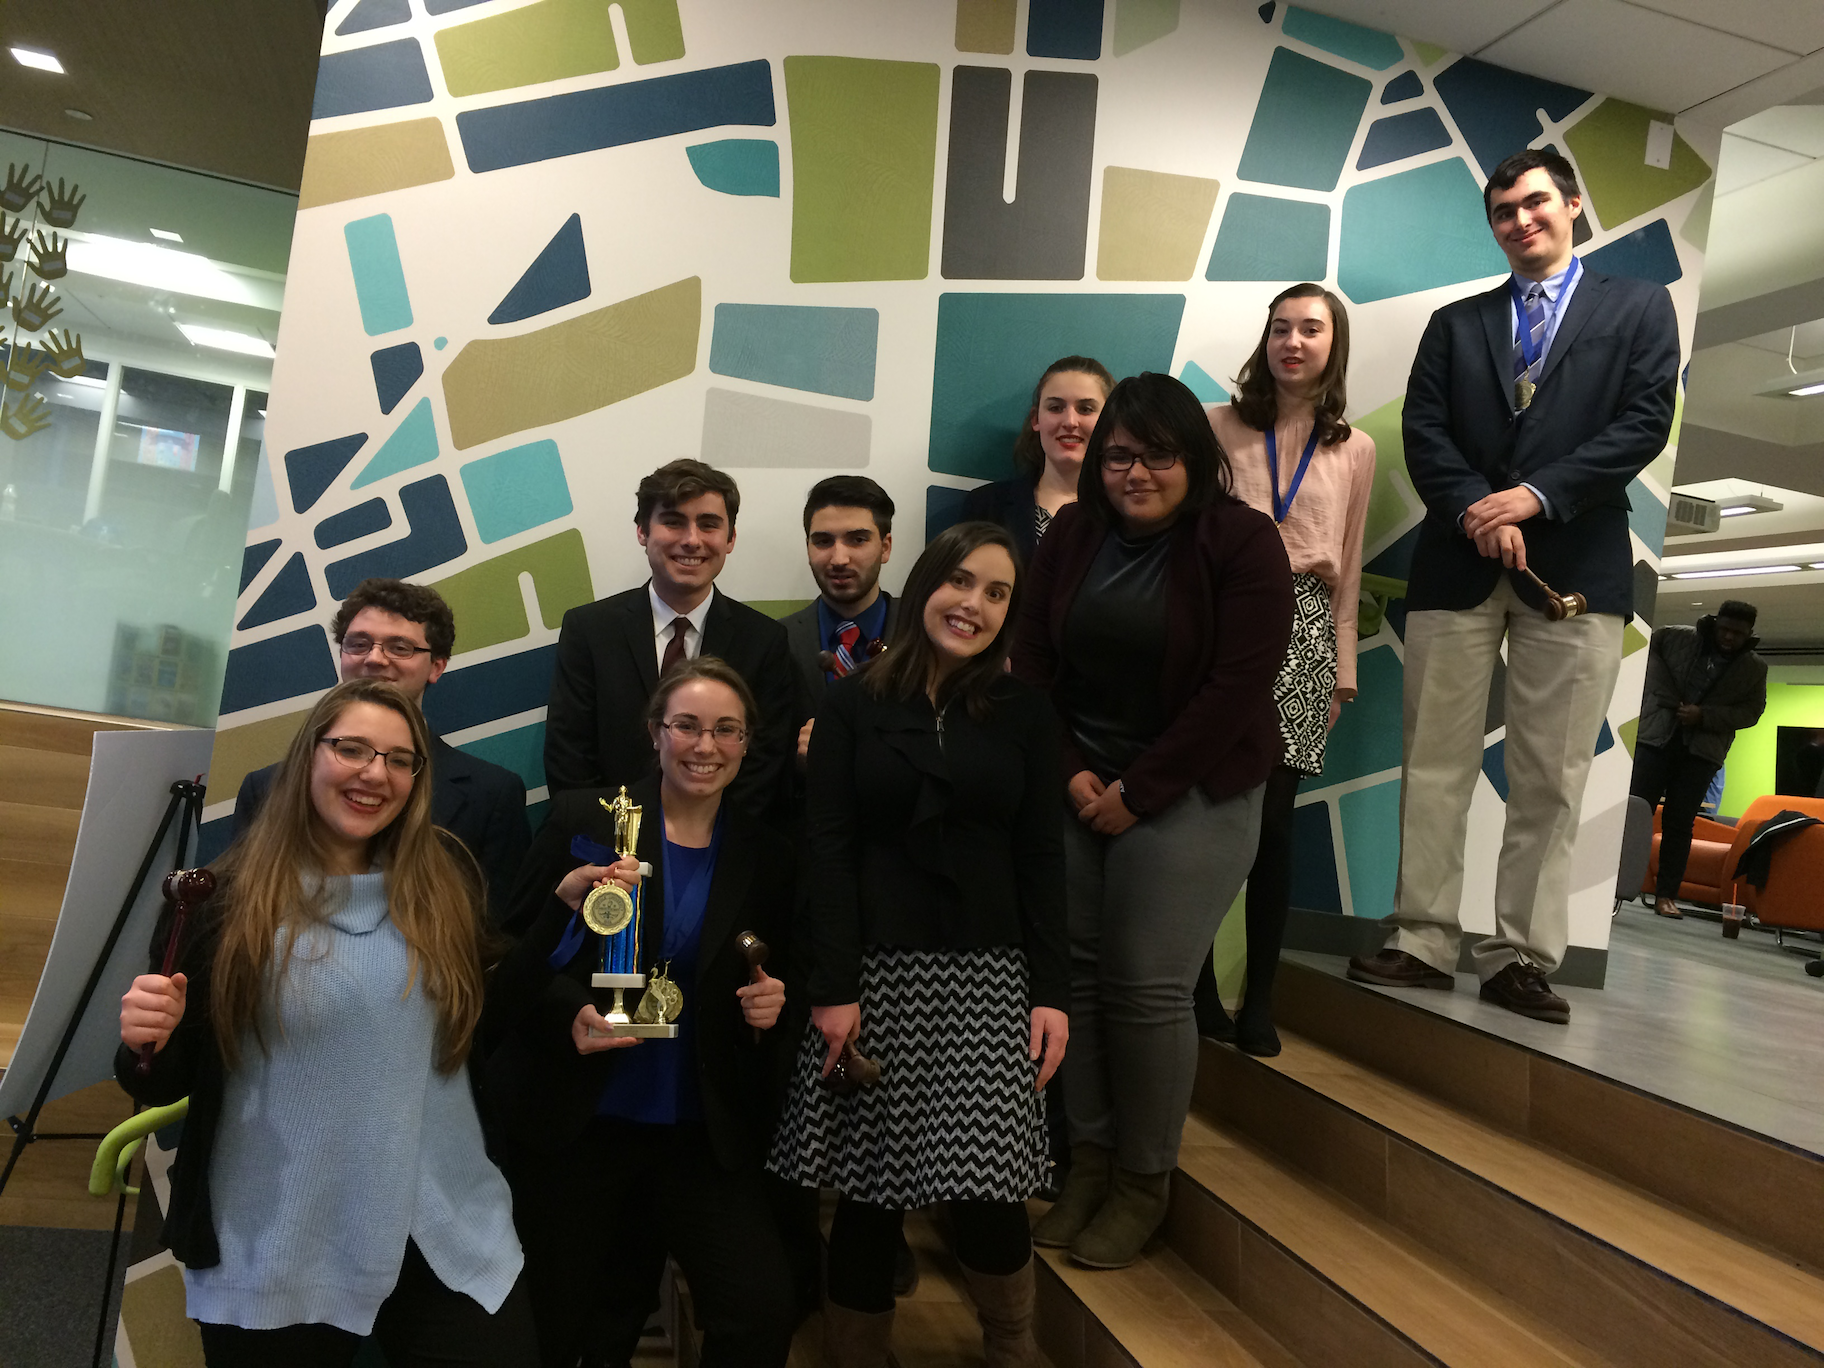 Debate Team wins Northeast Regional Championship for the ninth time